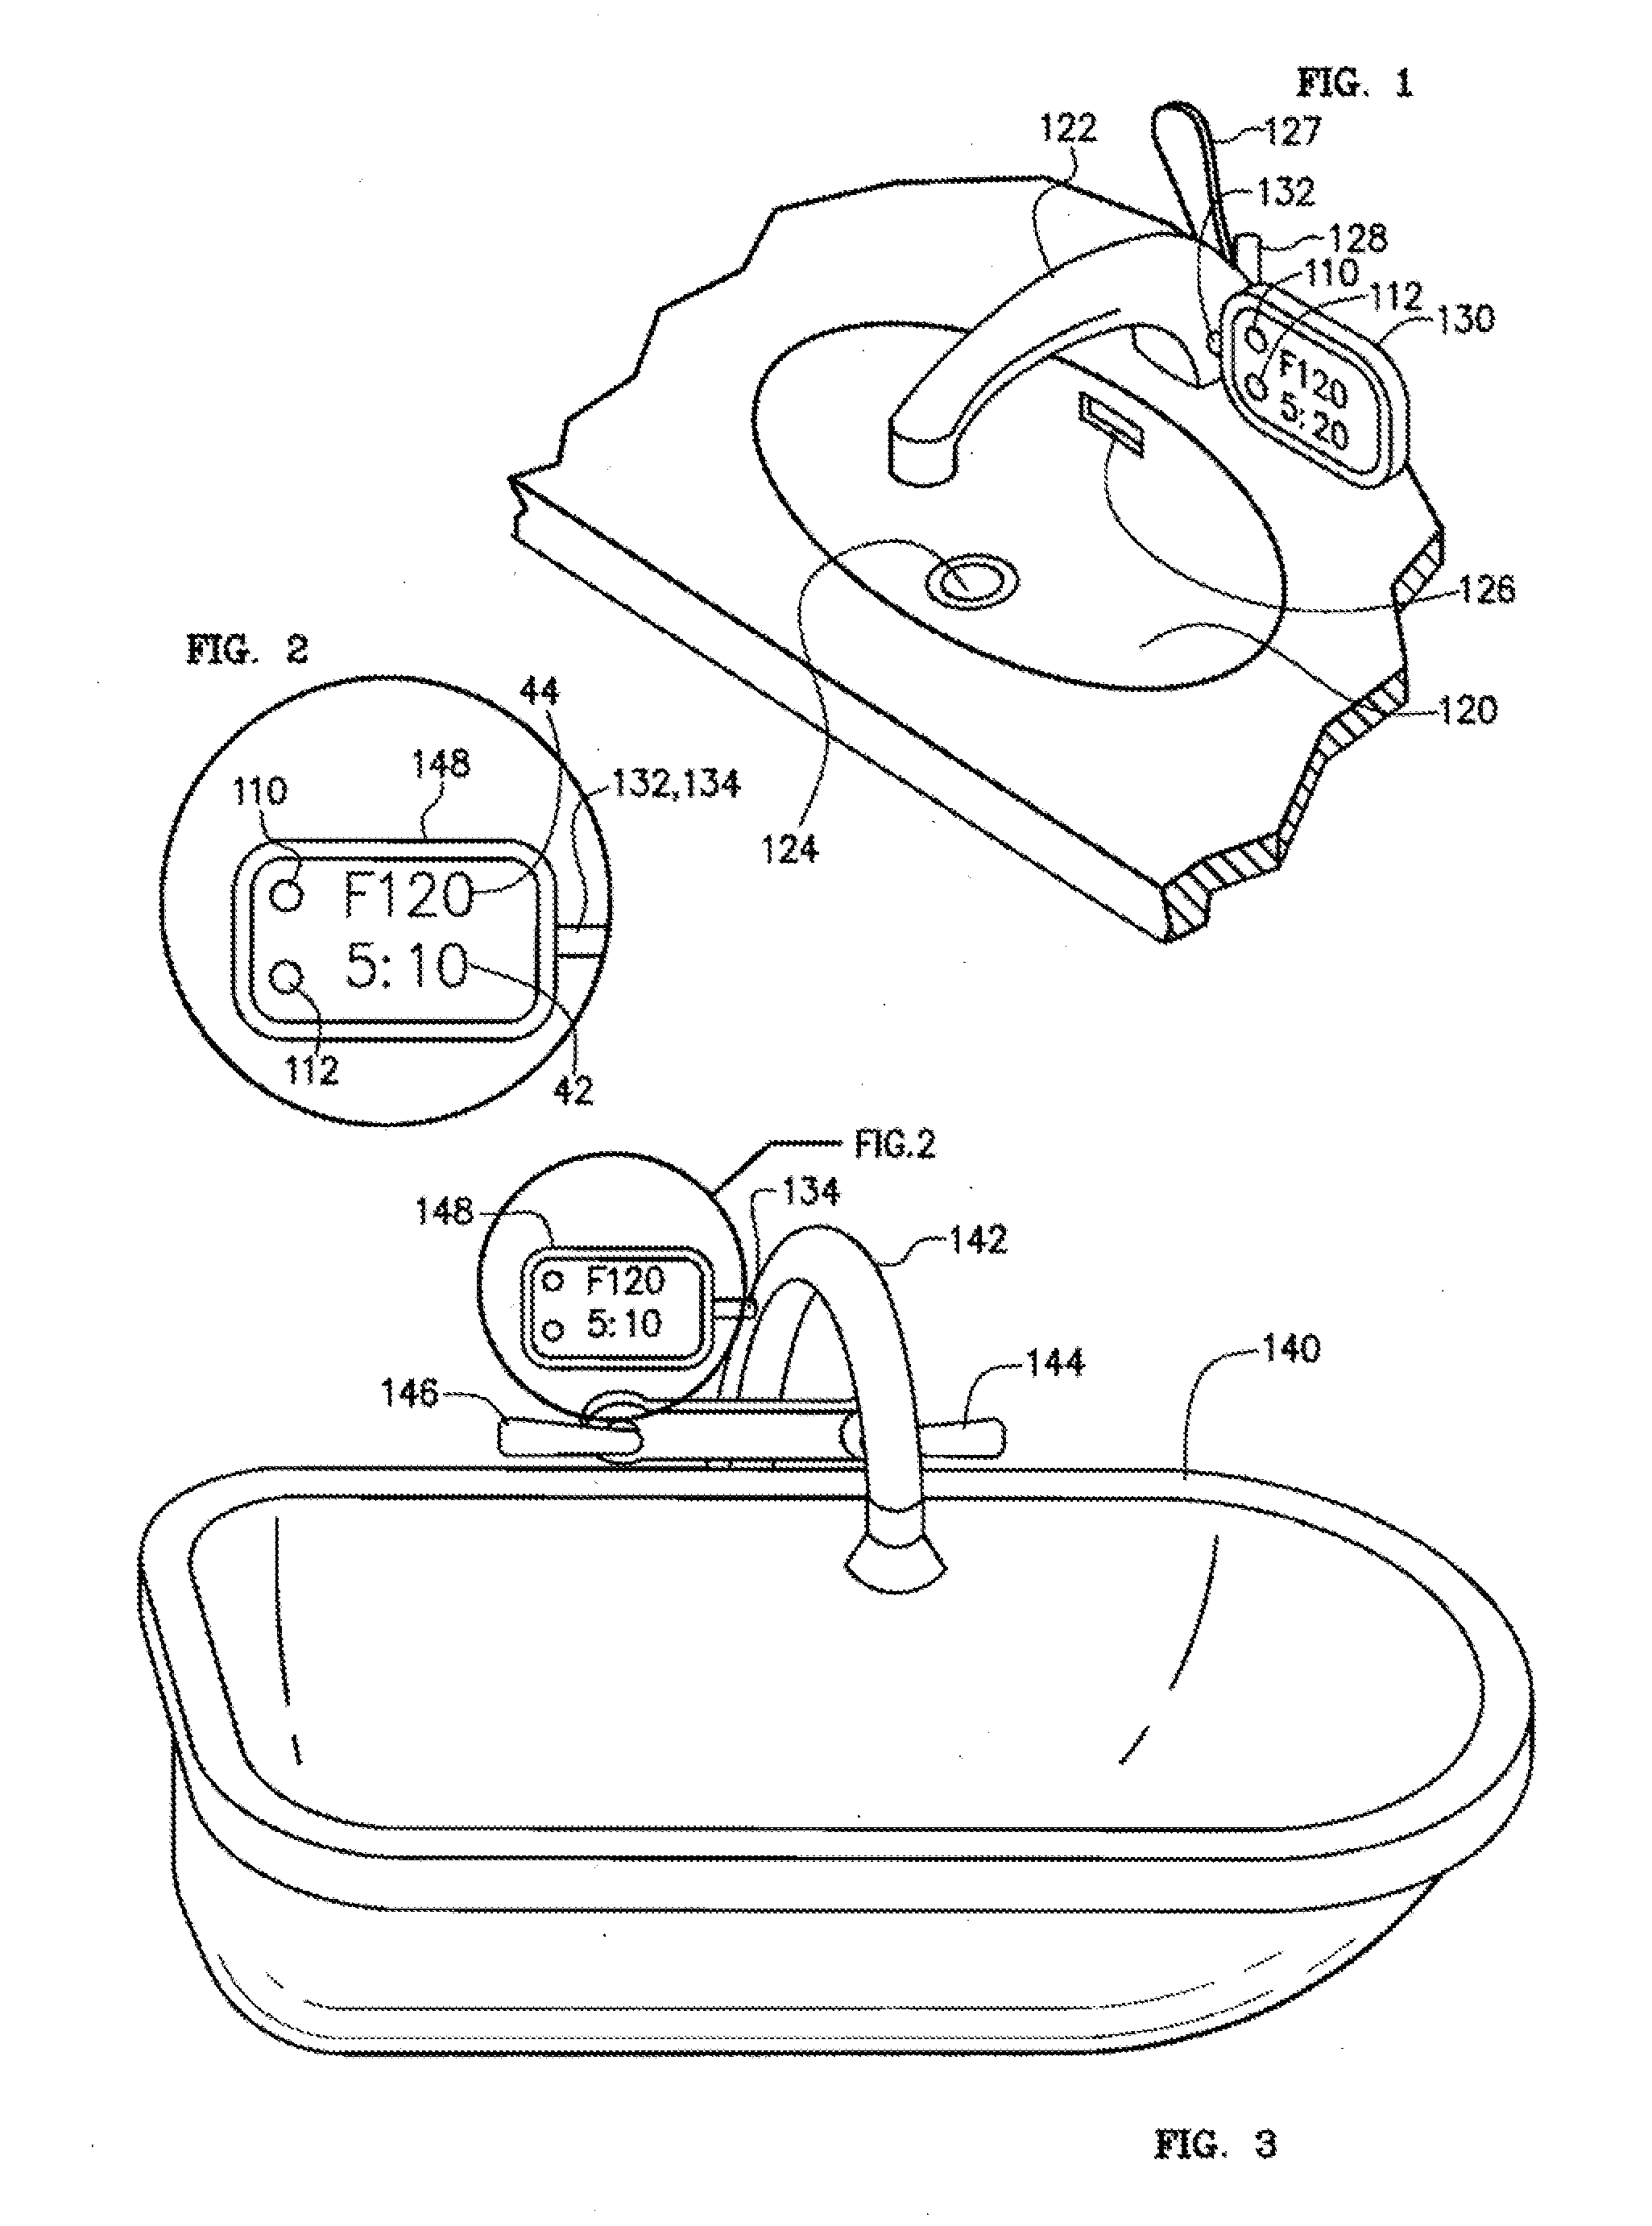 Water Parameter Apparatus for Displaying, Monitoring and/or Controlling Kitchen, Bathroom, Bath or Other Sink Faucets